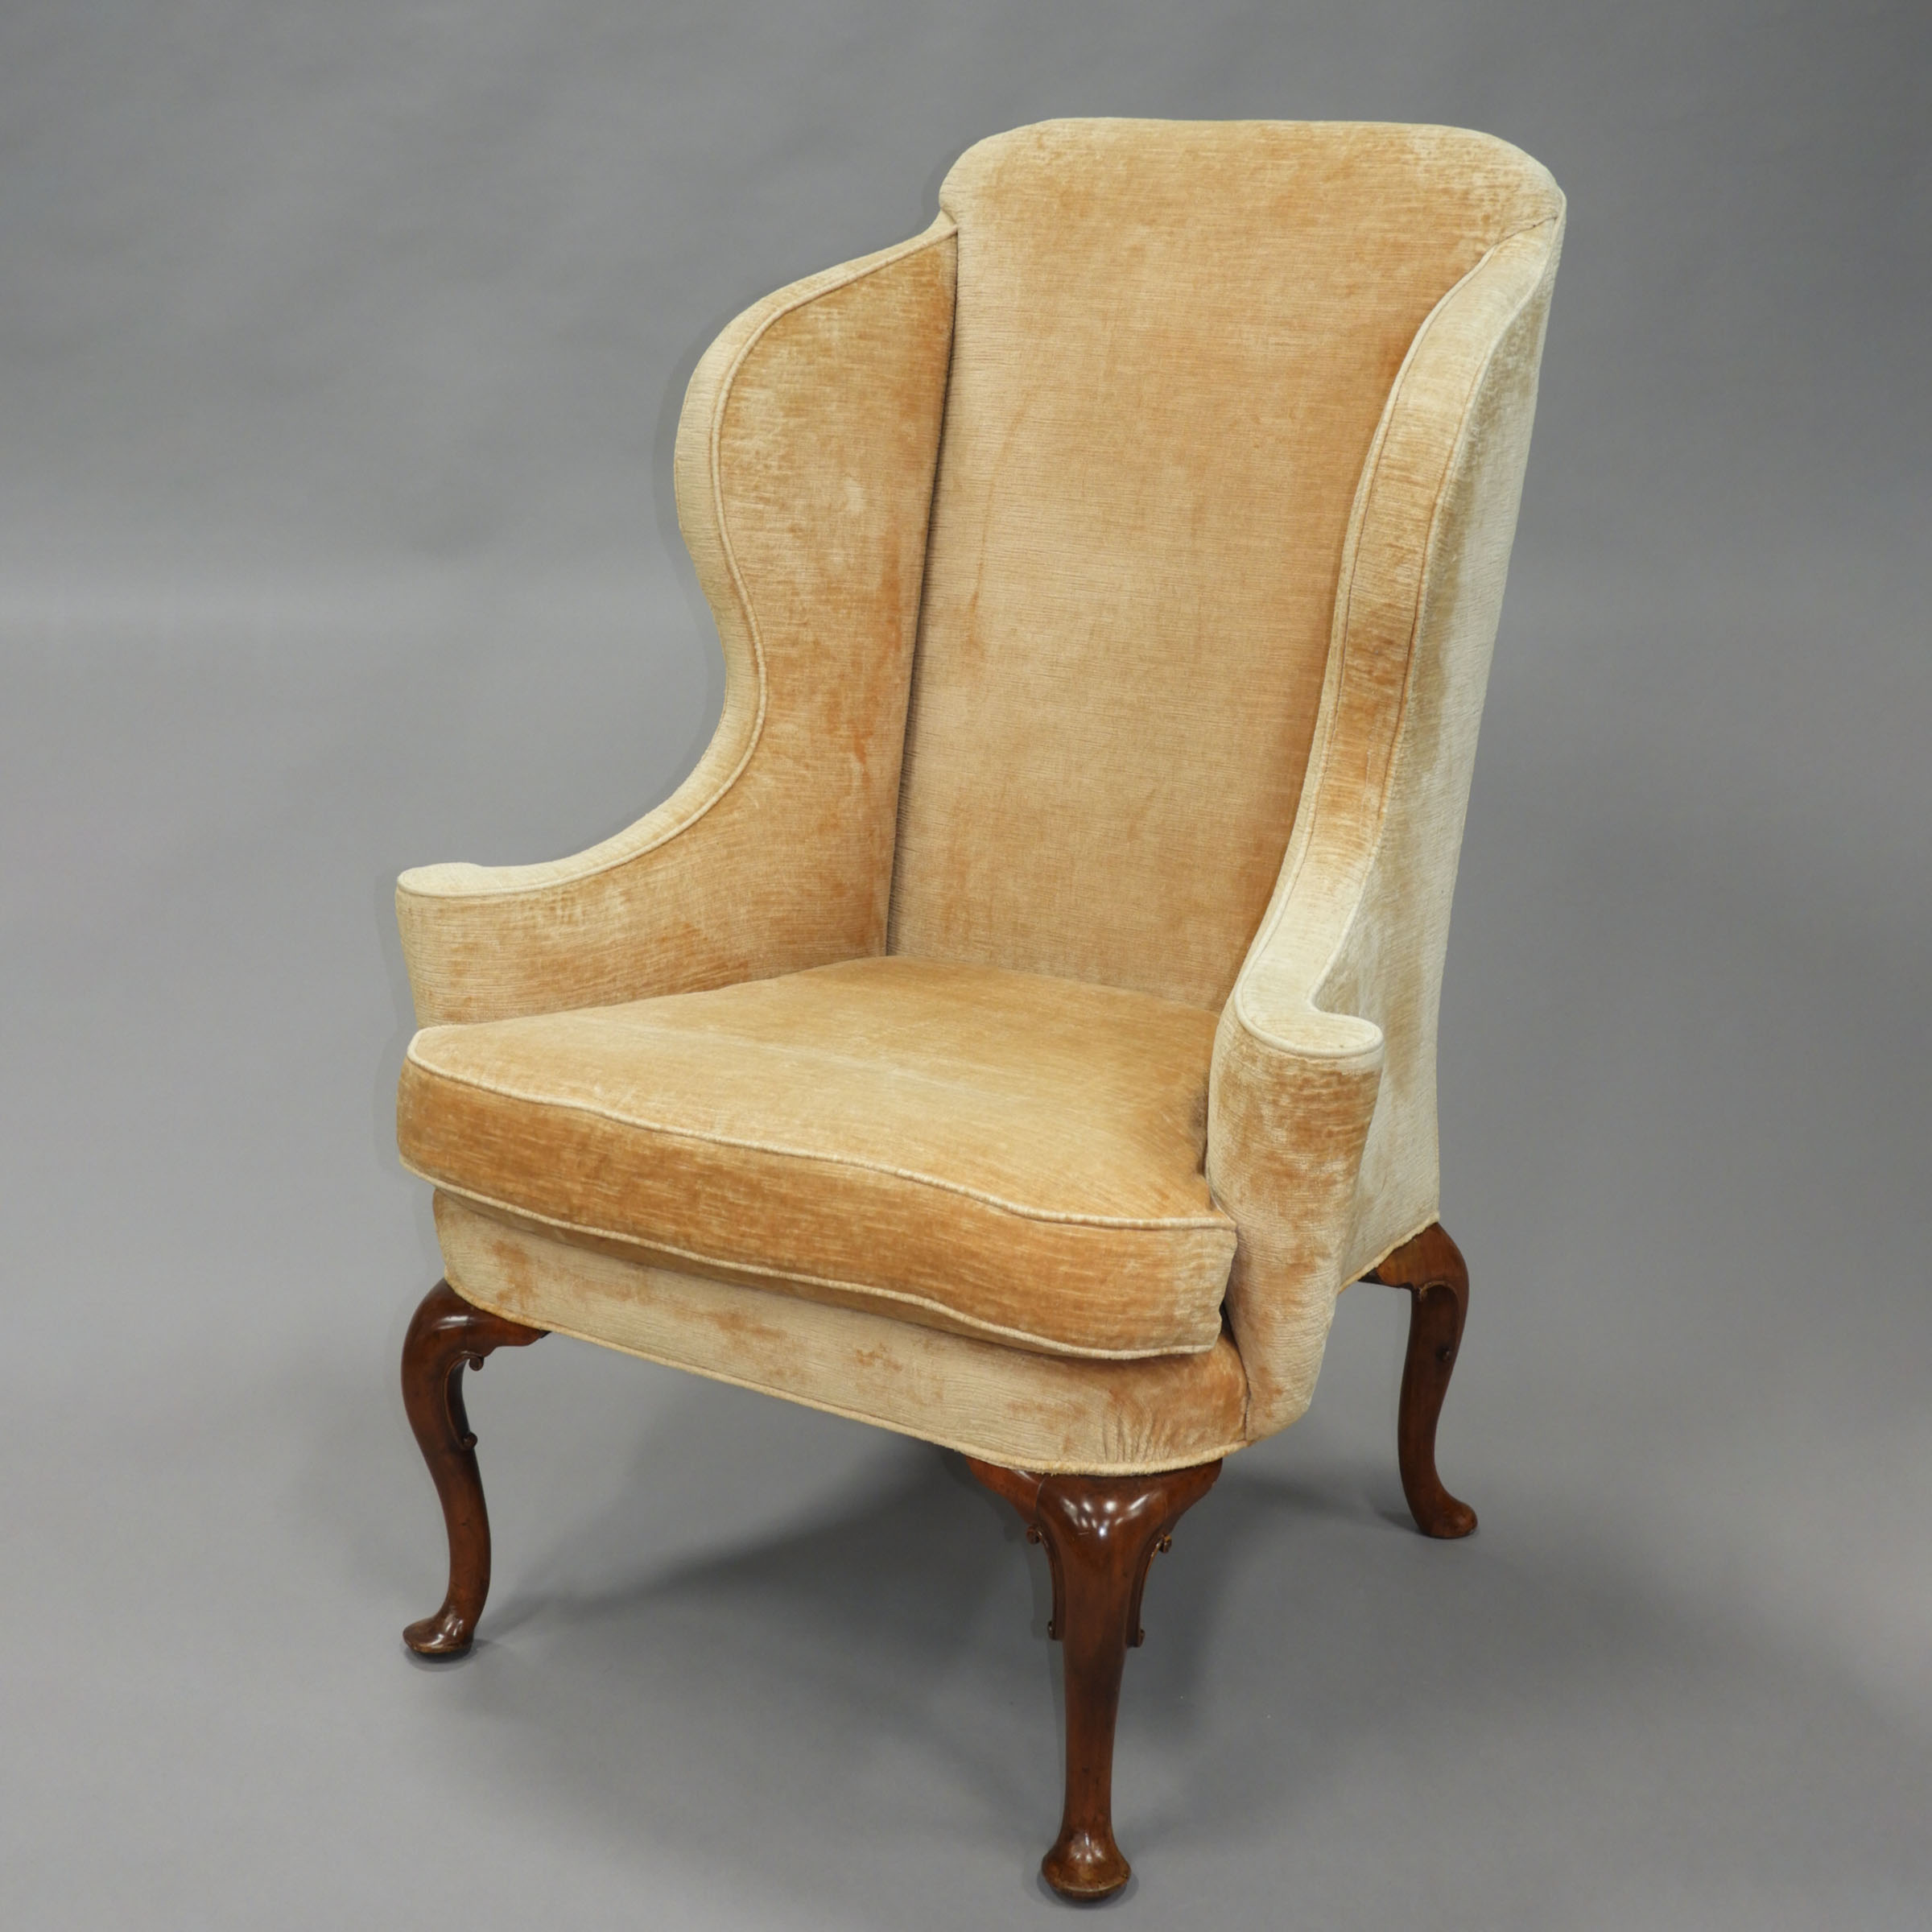 Queen Anne Wing Chair, early-mid 18th century